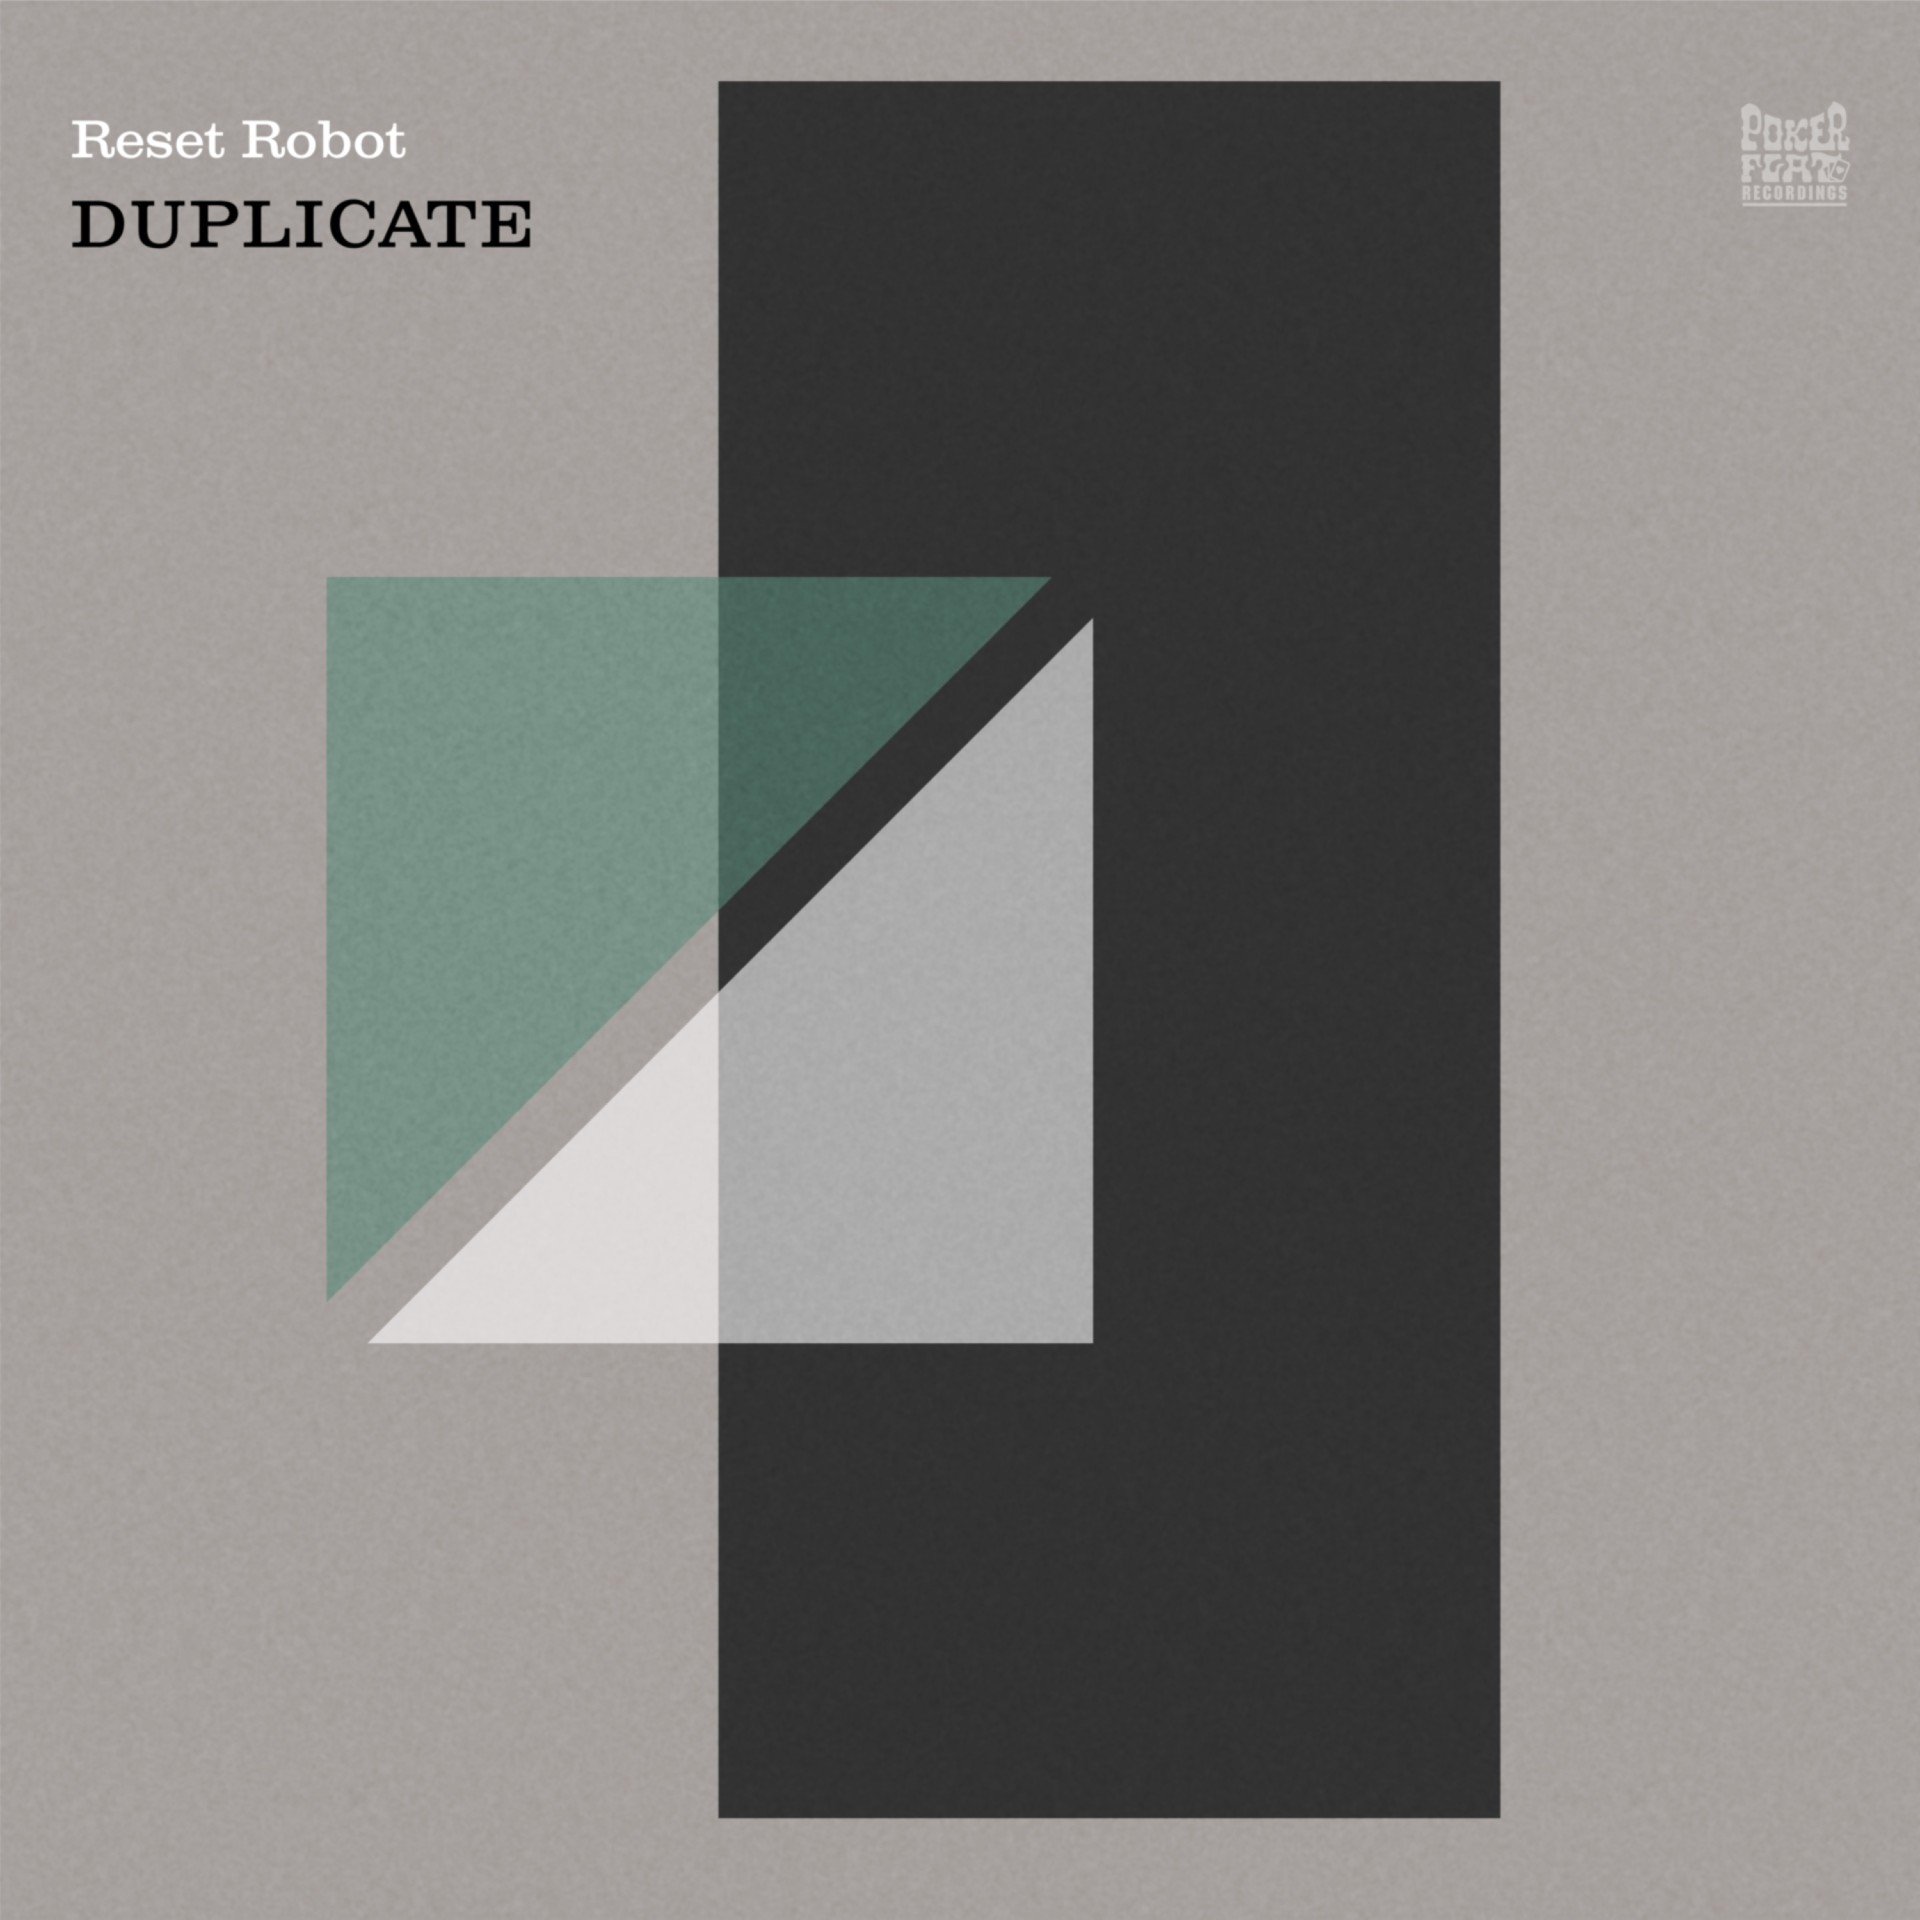 Artwork for the EP ‘Duplicate’ by Reset Robot